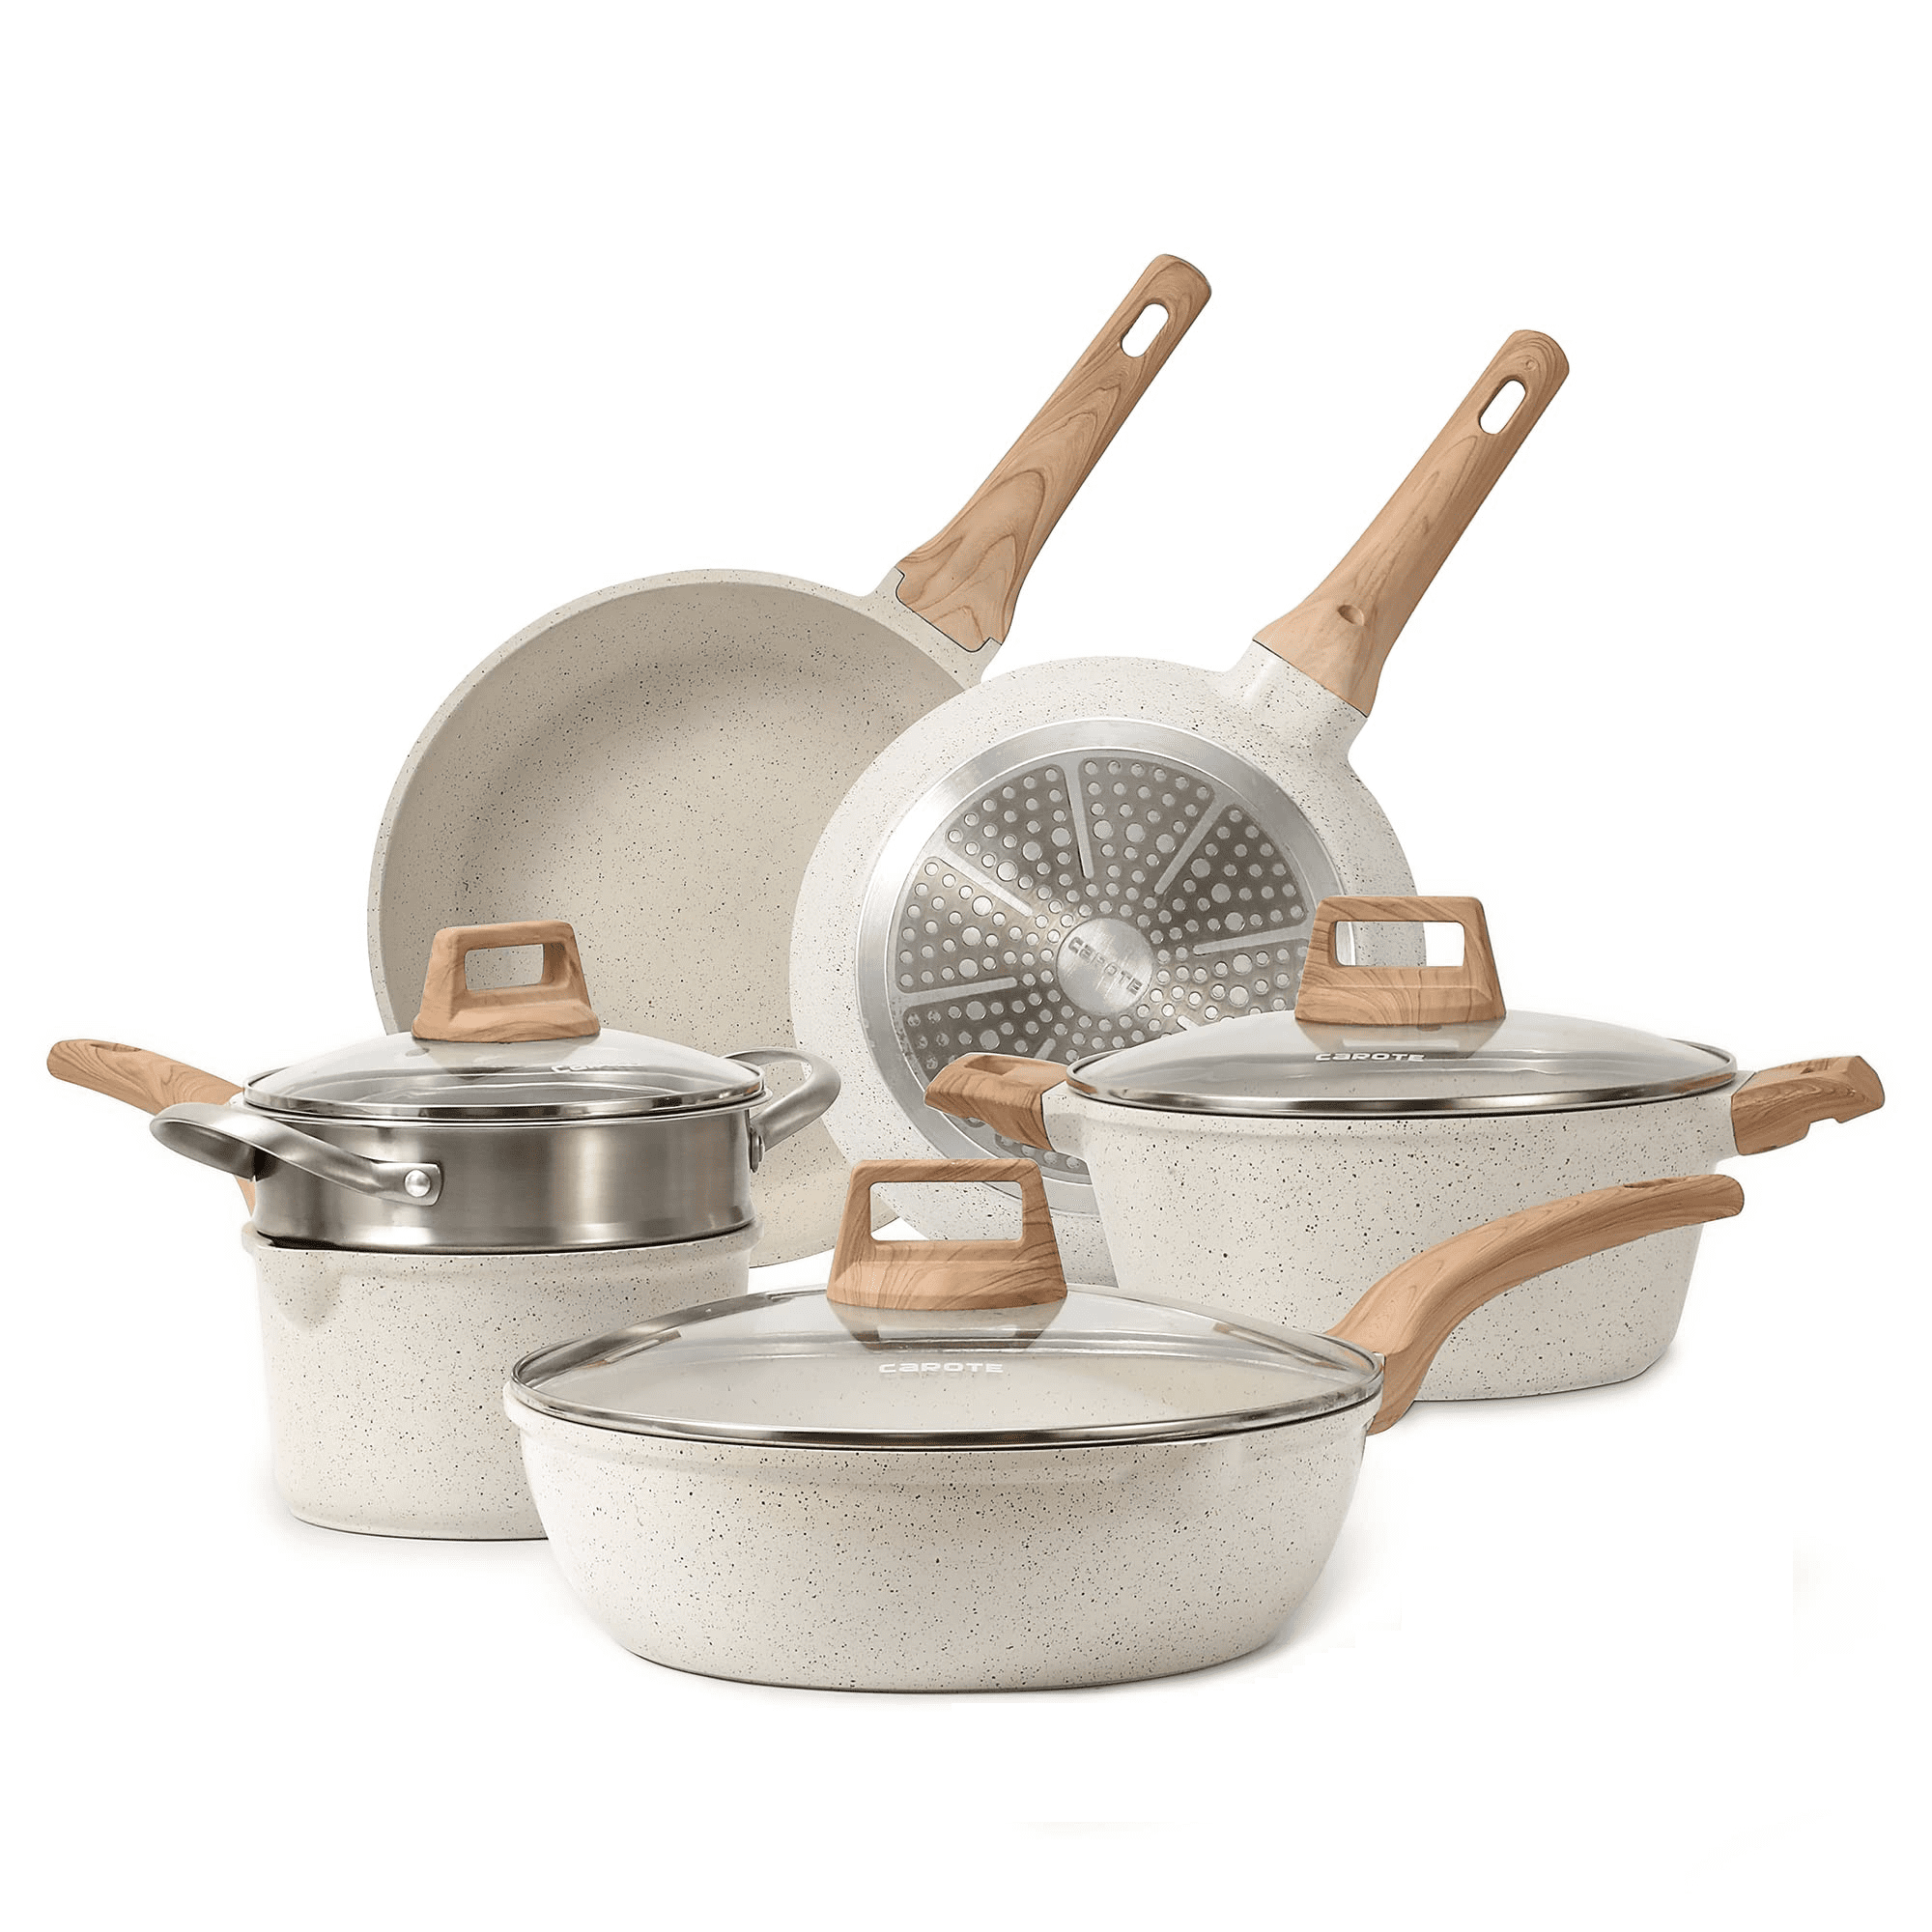 9-Piece Carote Nonstick Pots and Pans Set Induction Kitchen Cookware Sets  Free Gift Turner (White Granite) $69.99 + Free Shipping